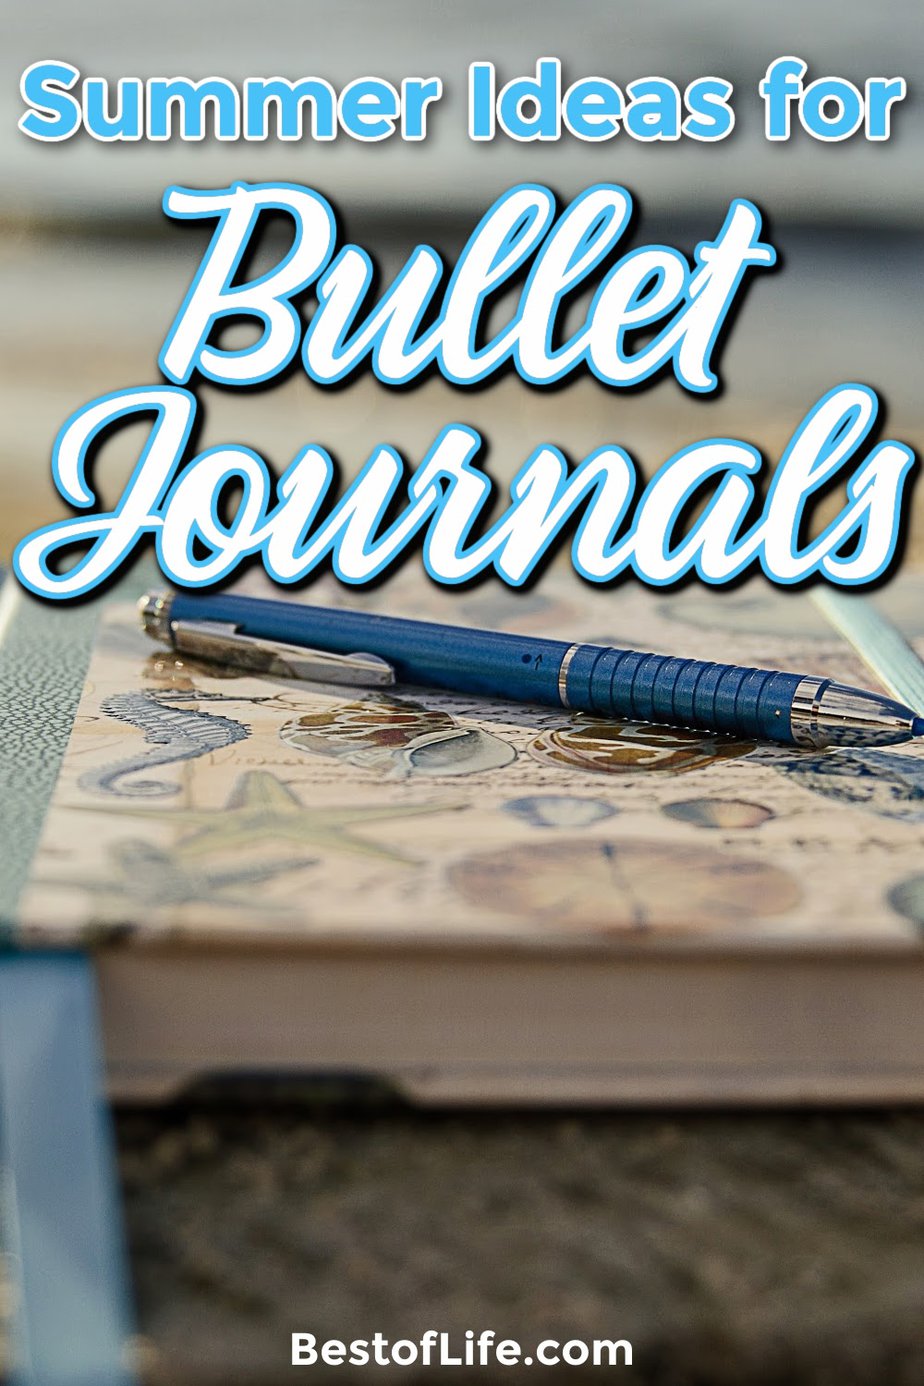 Use the best summer bullet journal ideas to help keep your life in order so you can enjoy the warm weather and your travels. Summer Fun Ideas | Bullet Journal Ideas | Bullet Journal Spreads for Summer | Summer Bullet Journal Ideas | Vacation Bullet Journal Ideas #bulletjournal #summerfun via @thebestoflife